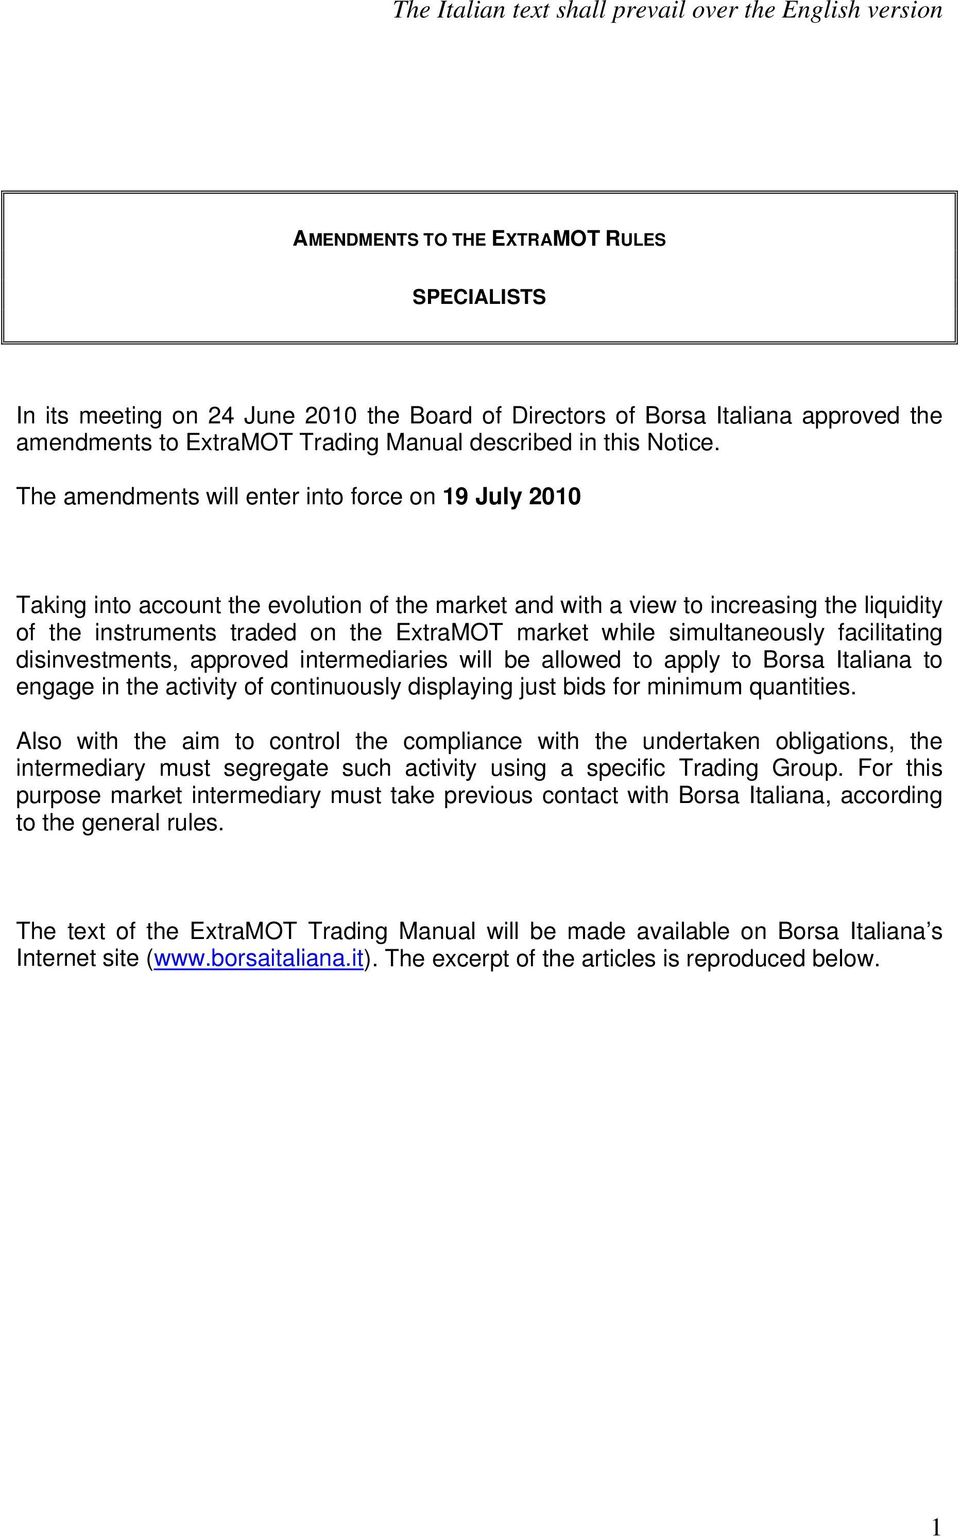 The amendments will enter into force on 19 July 2010 Taking into account the evolution of the market and with a view to increasing the liquidity of the instruments traded on the ExtraMOT market while